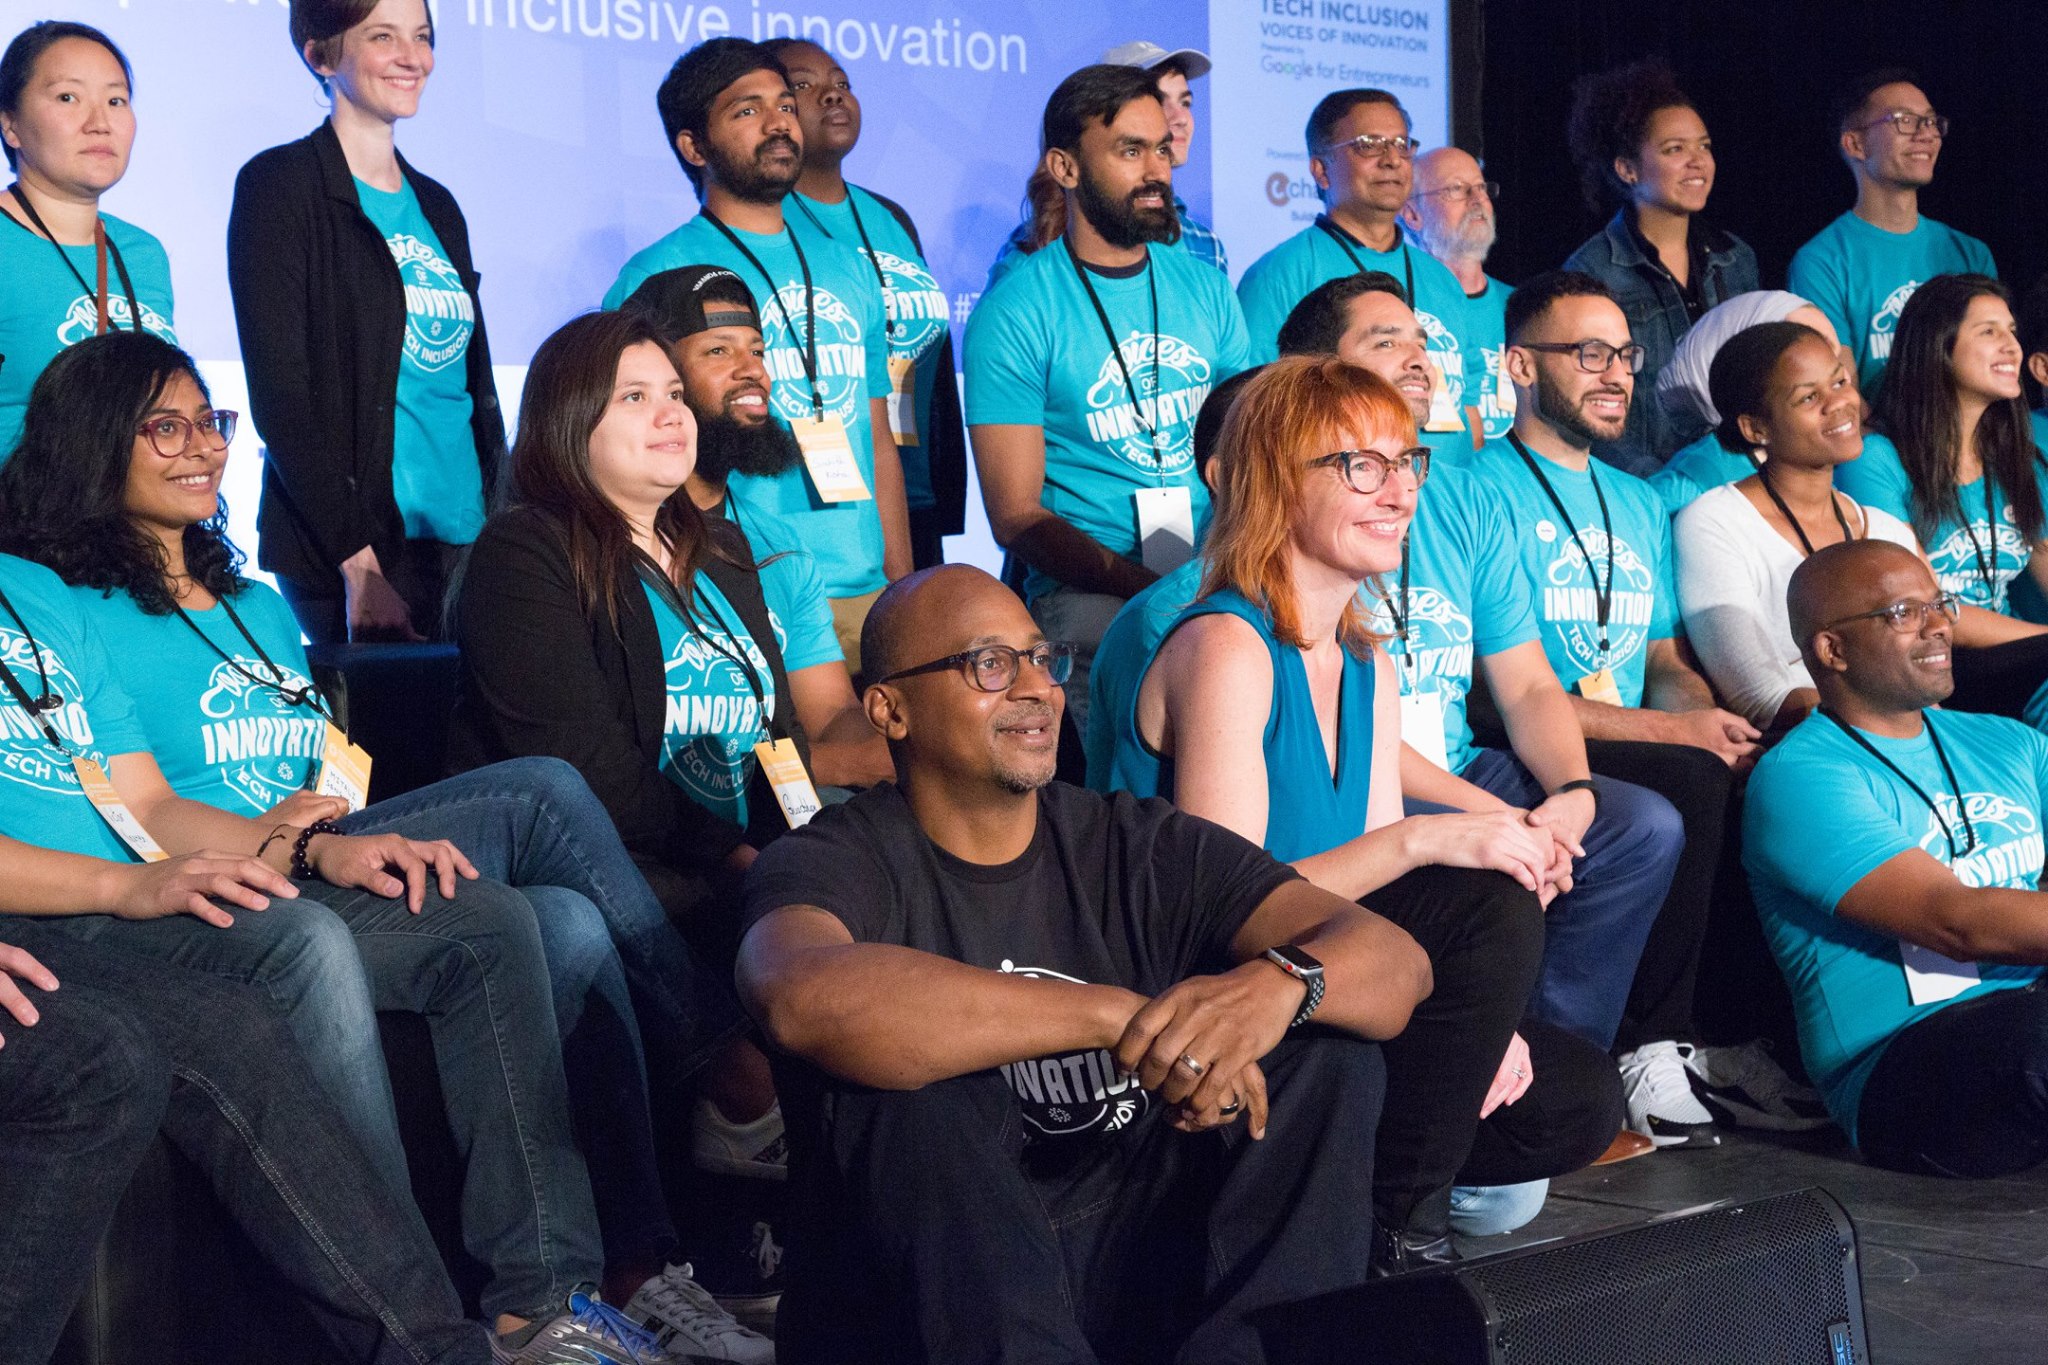 A group of several Tech Inclusion workers in a group photo on stage wearing matching blue t-shirts